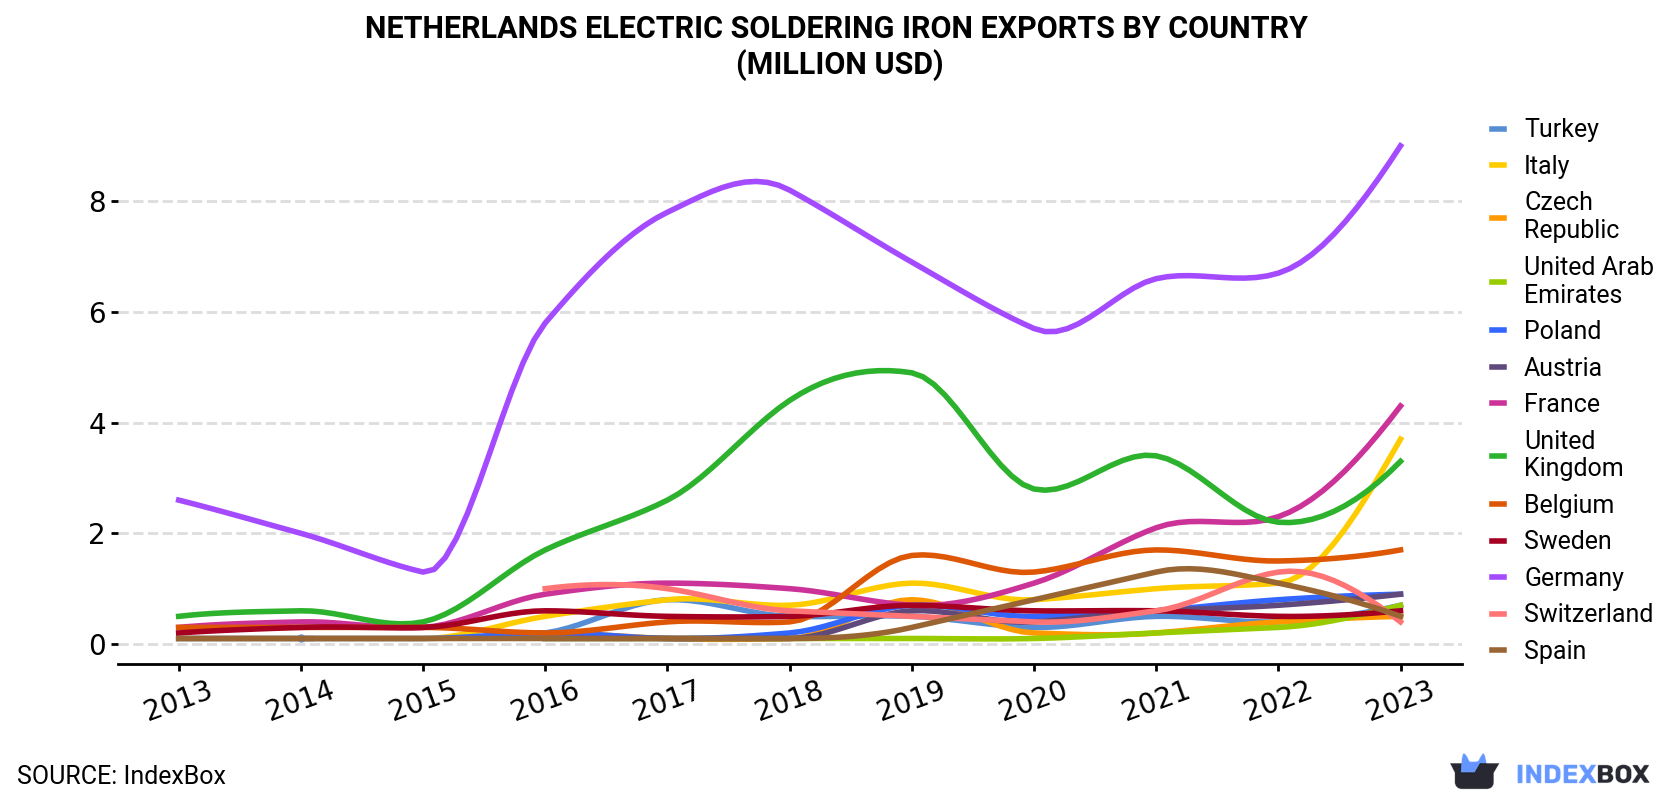 Netherlands Electric Soldering Iron Exports By Country (Million USD)